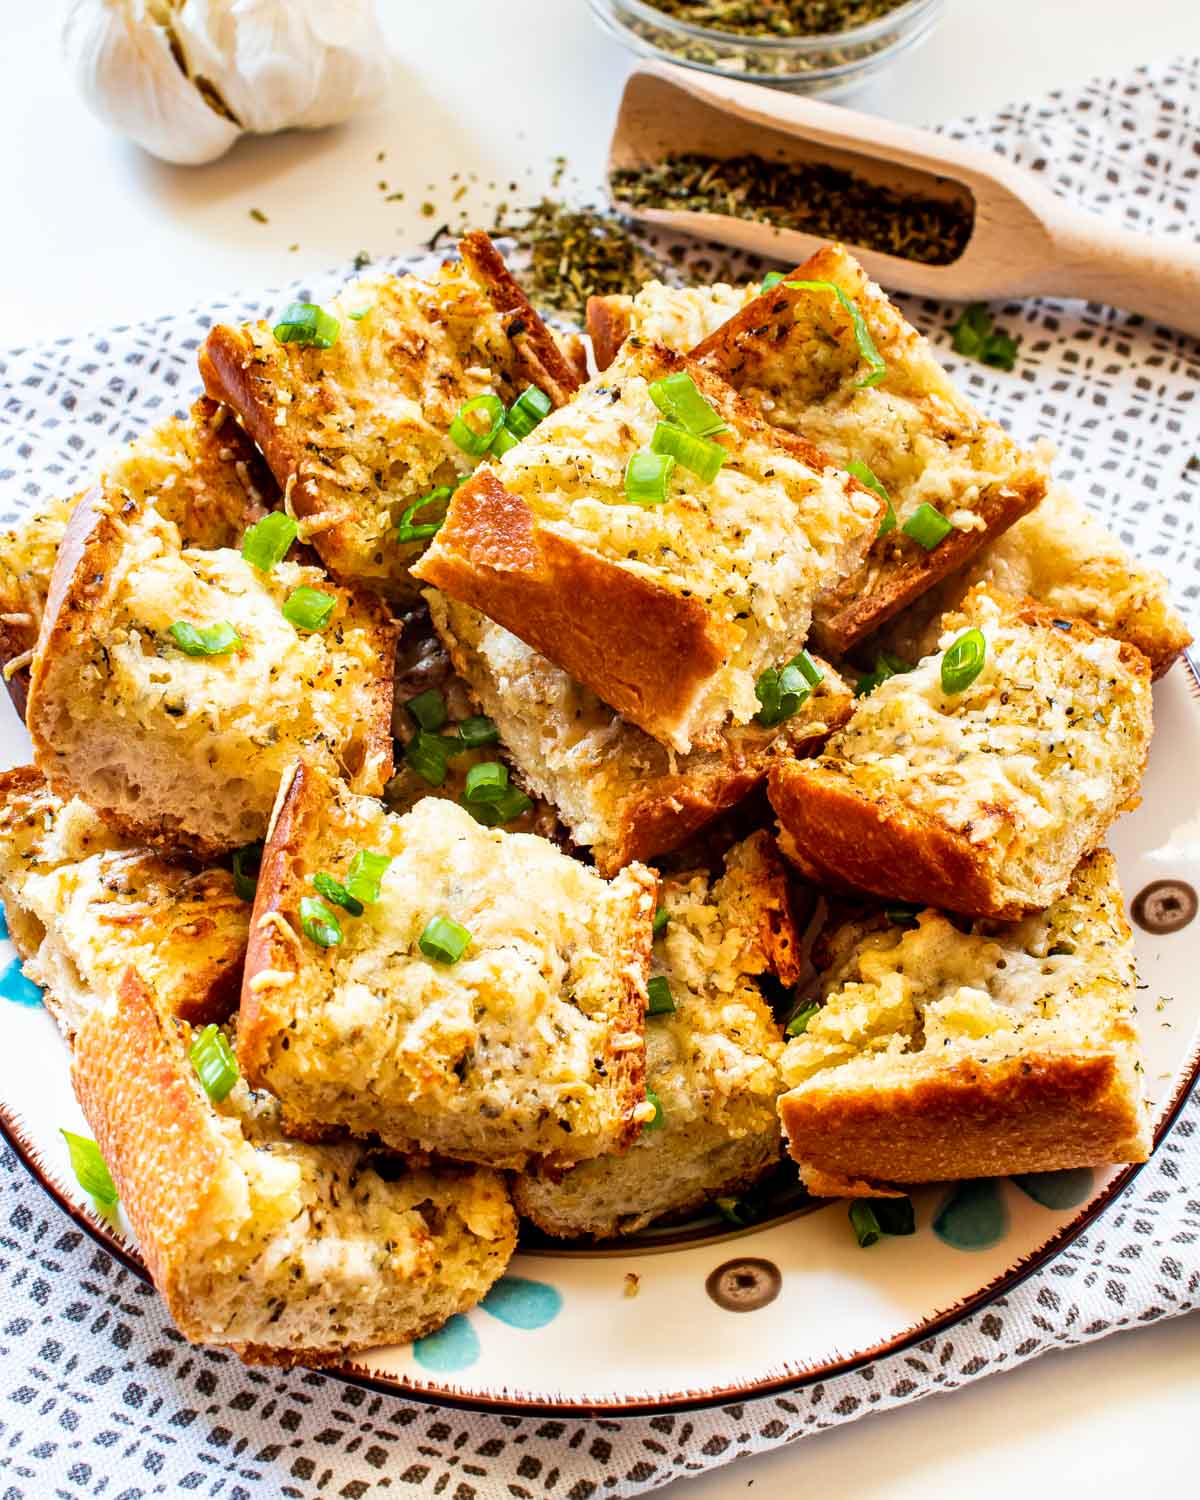 garlic bread cut up in slices on a plate garnished with green onions.